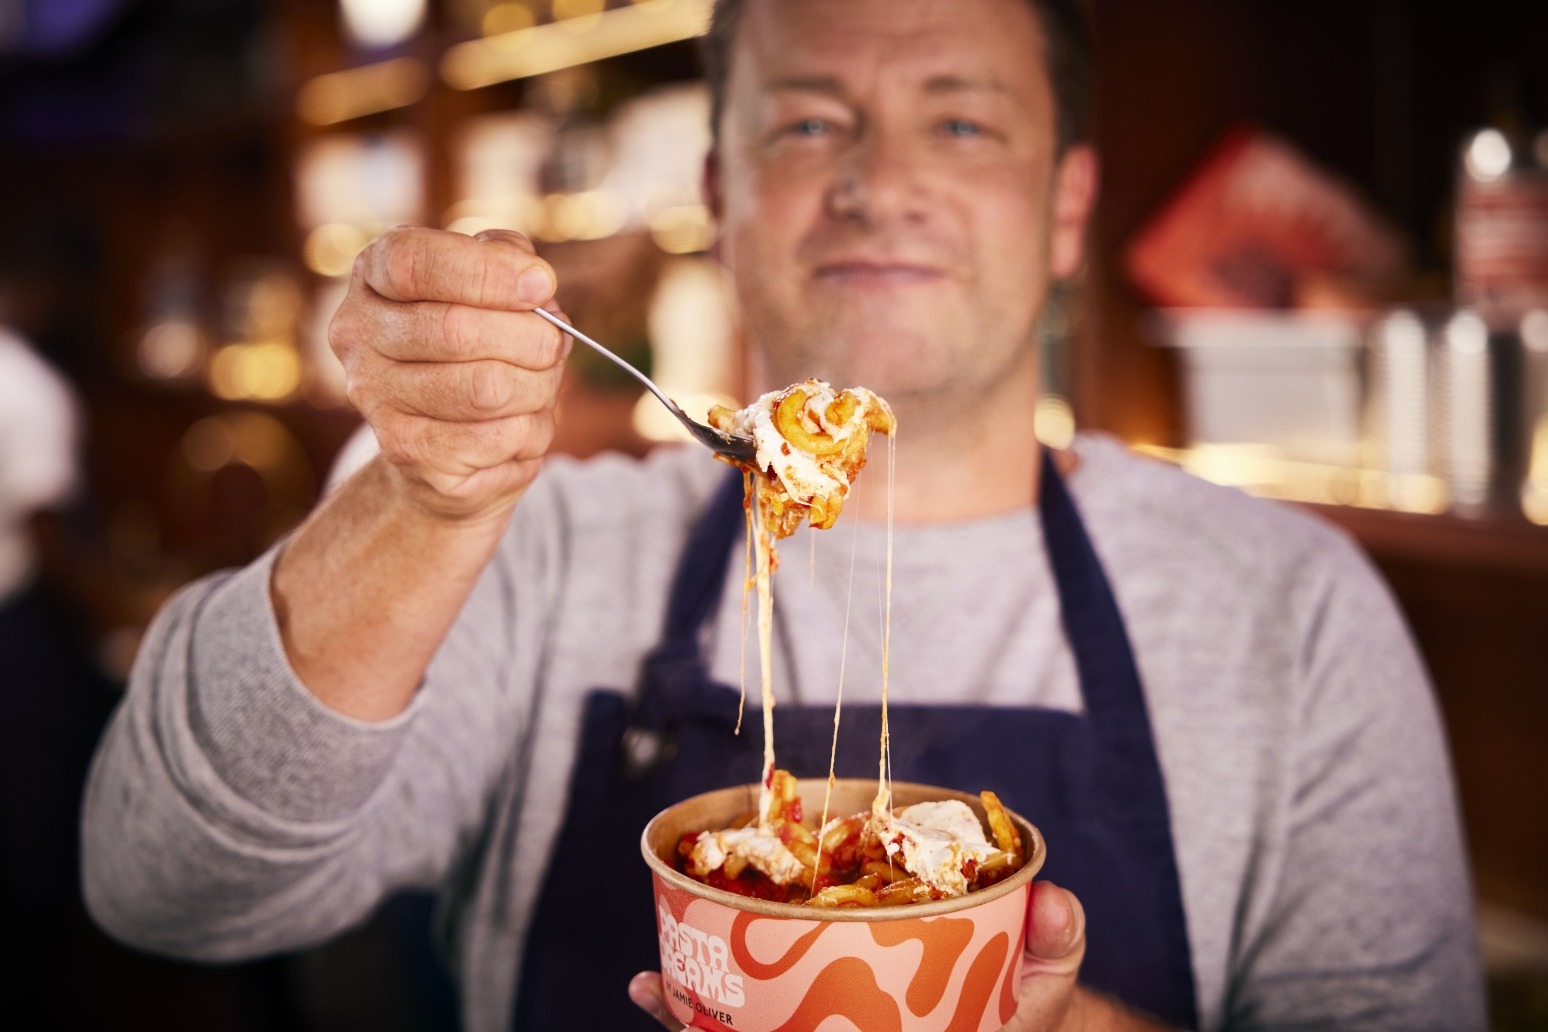 Jamie Oliver calls restaurant collapse a ‘minor blip’ – and says failure has made him better 